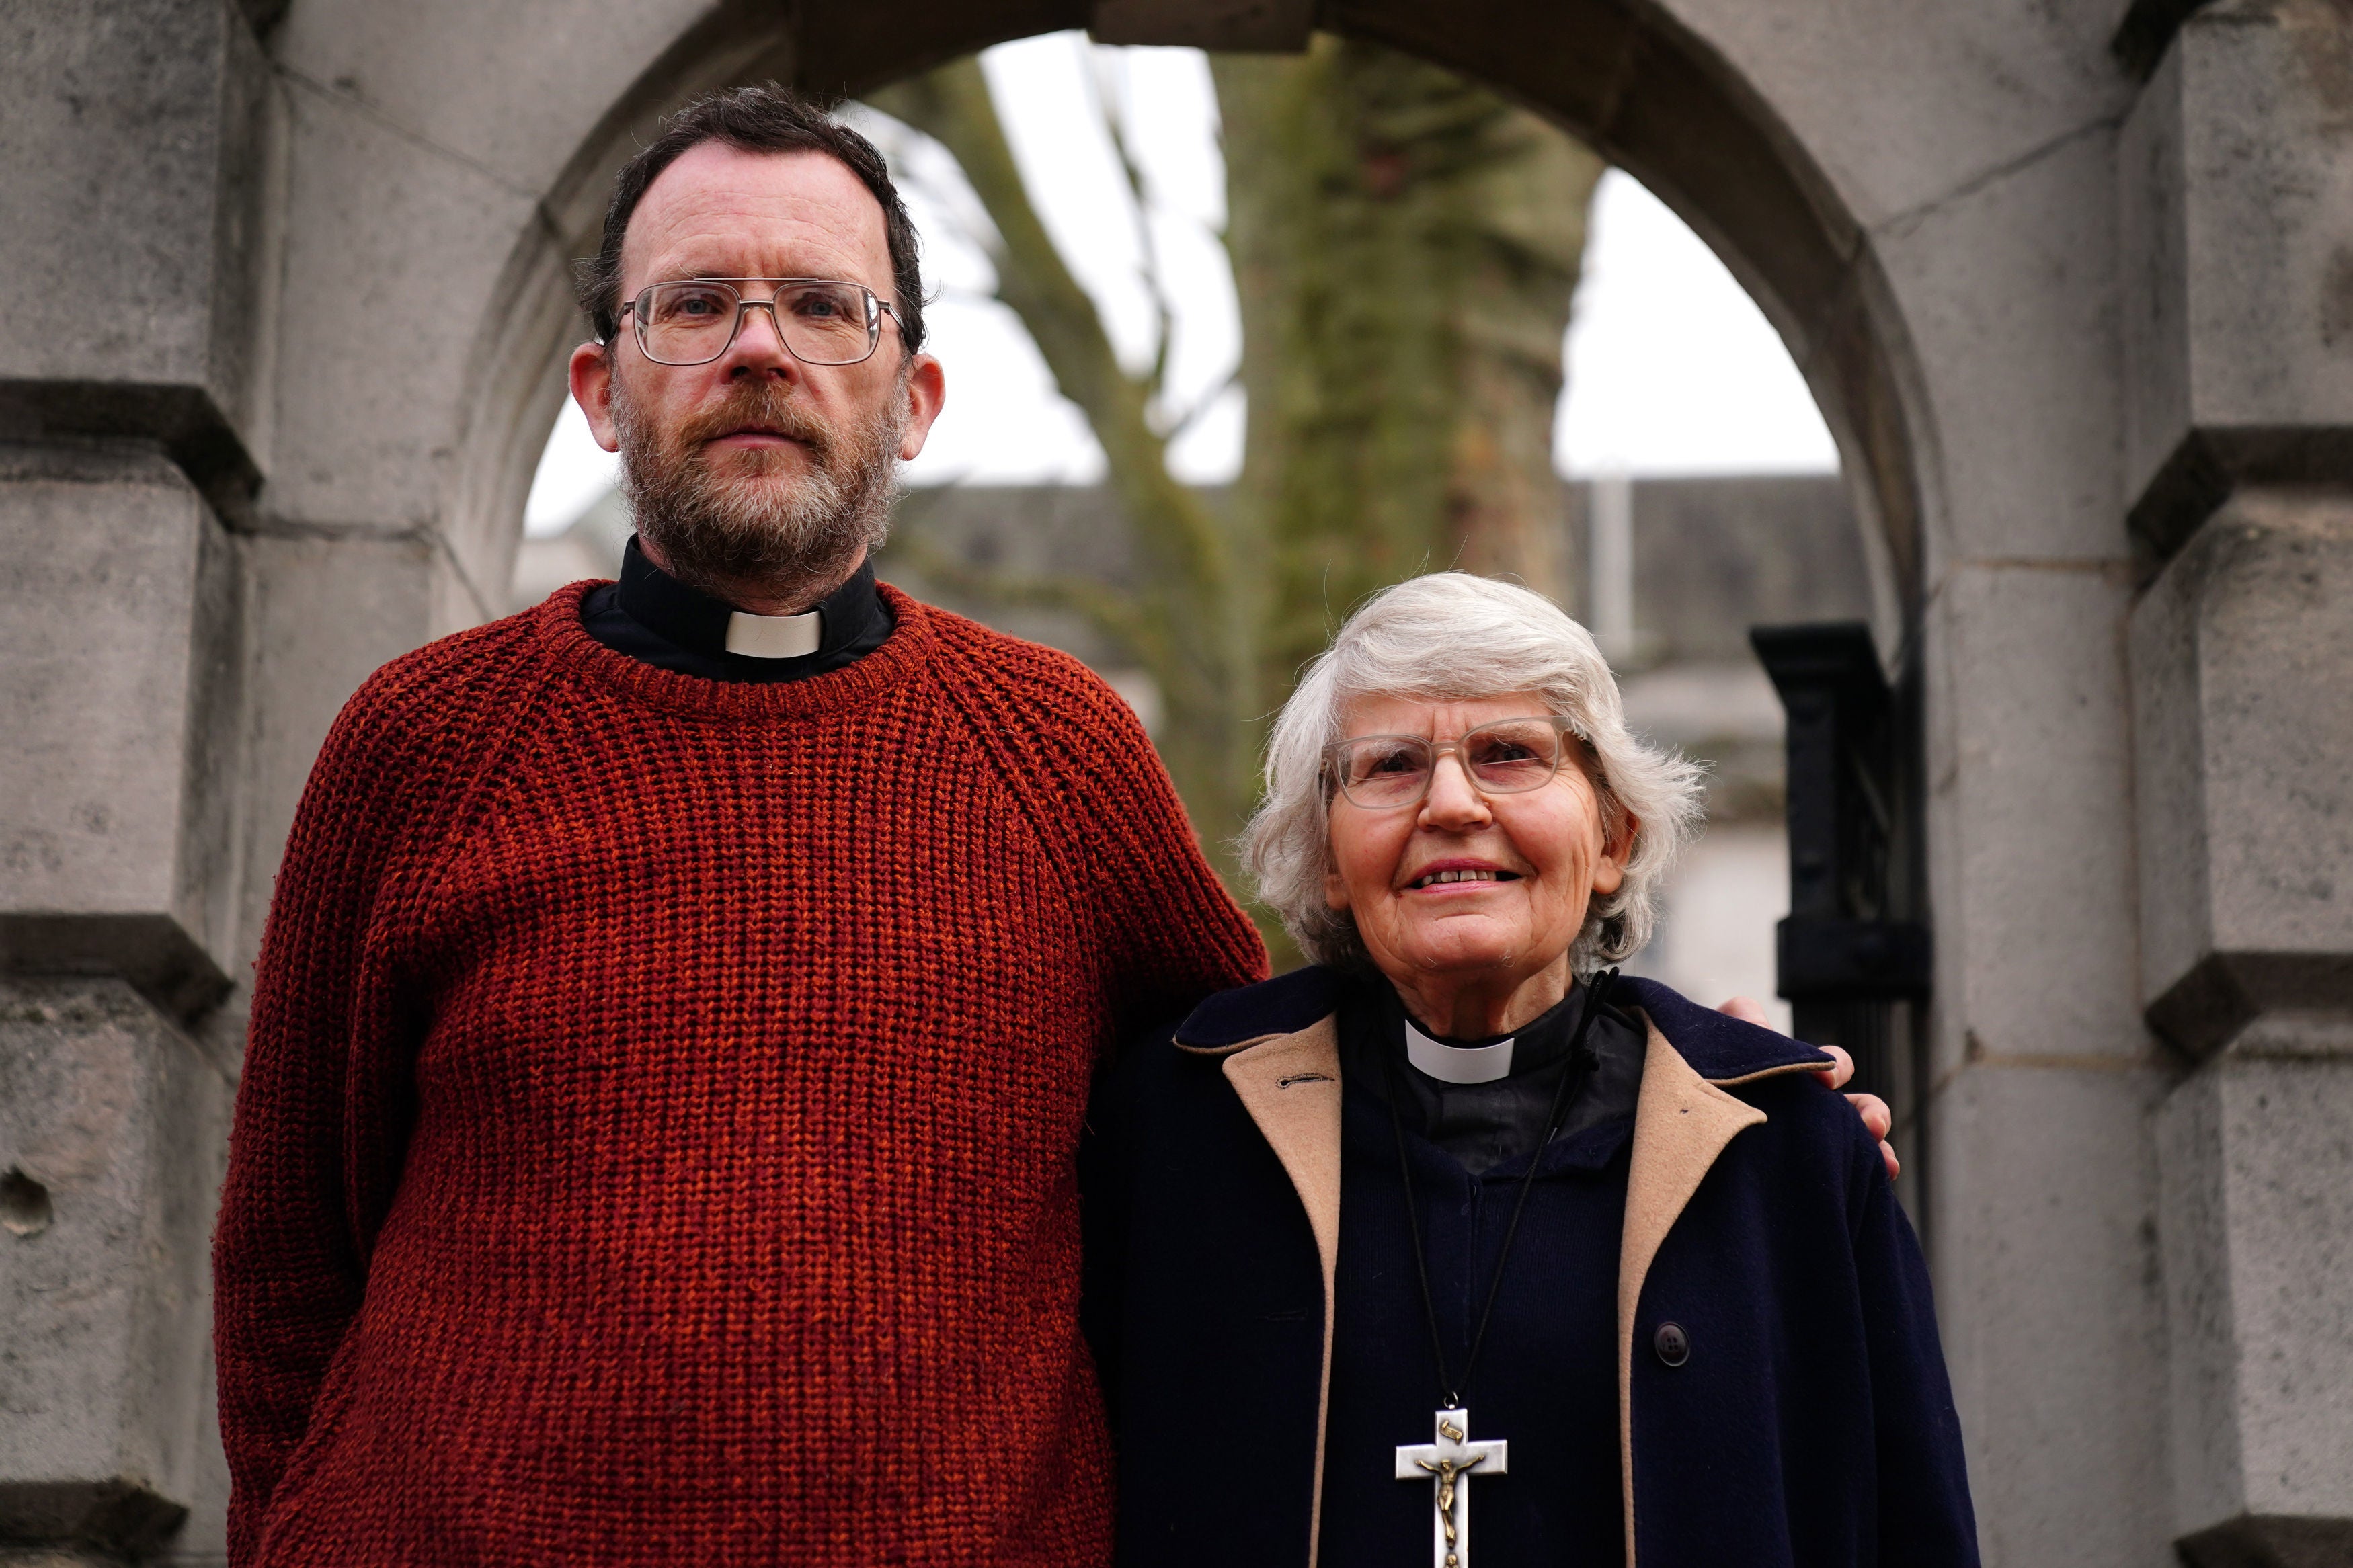 Father Martin Newell and Reverend Sue Parfitt are charged with obstructing engines or carriages on railways